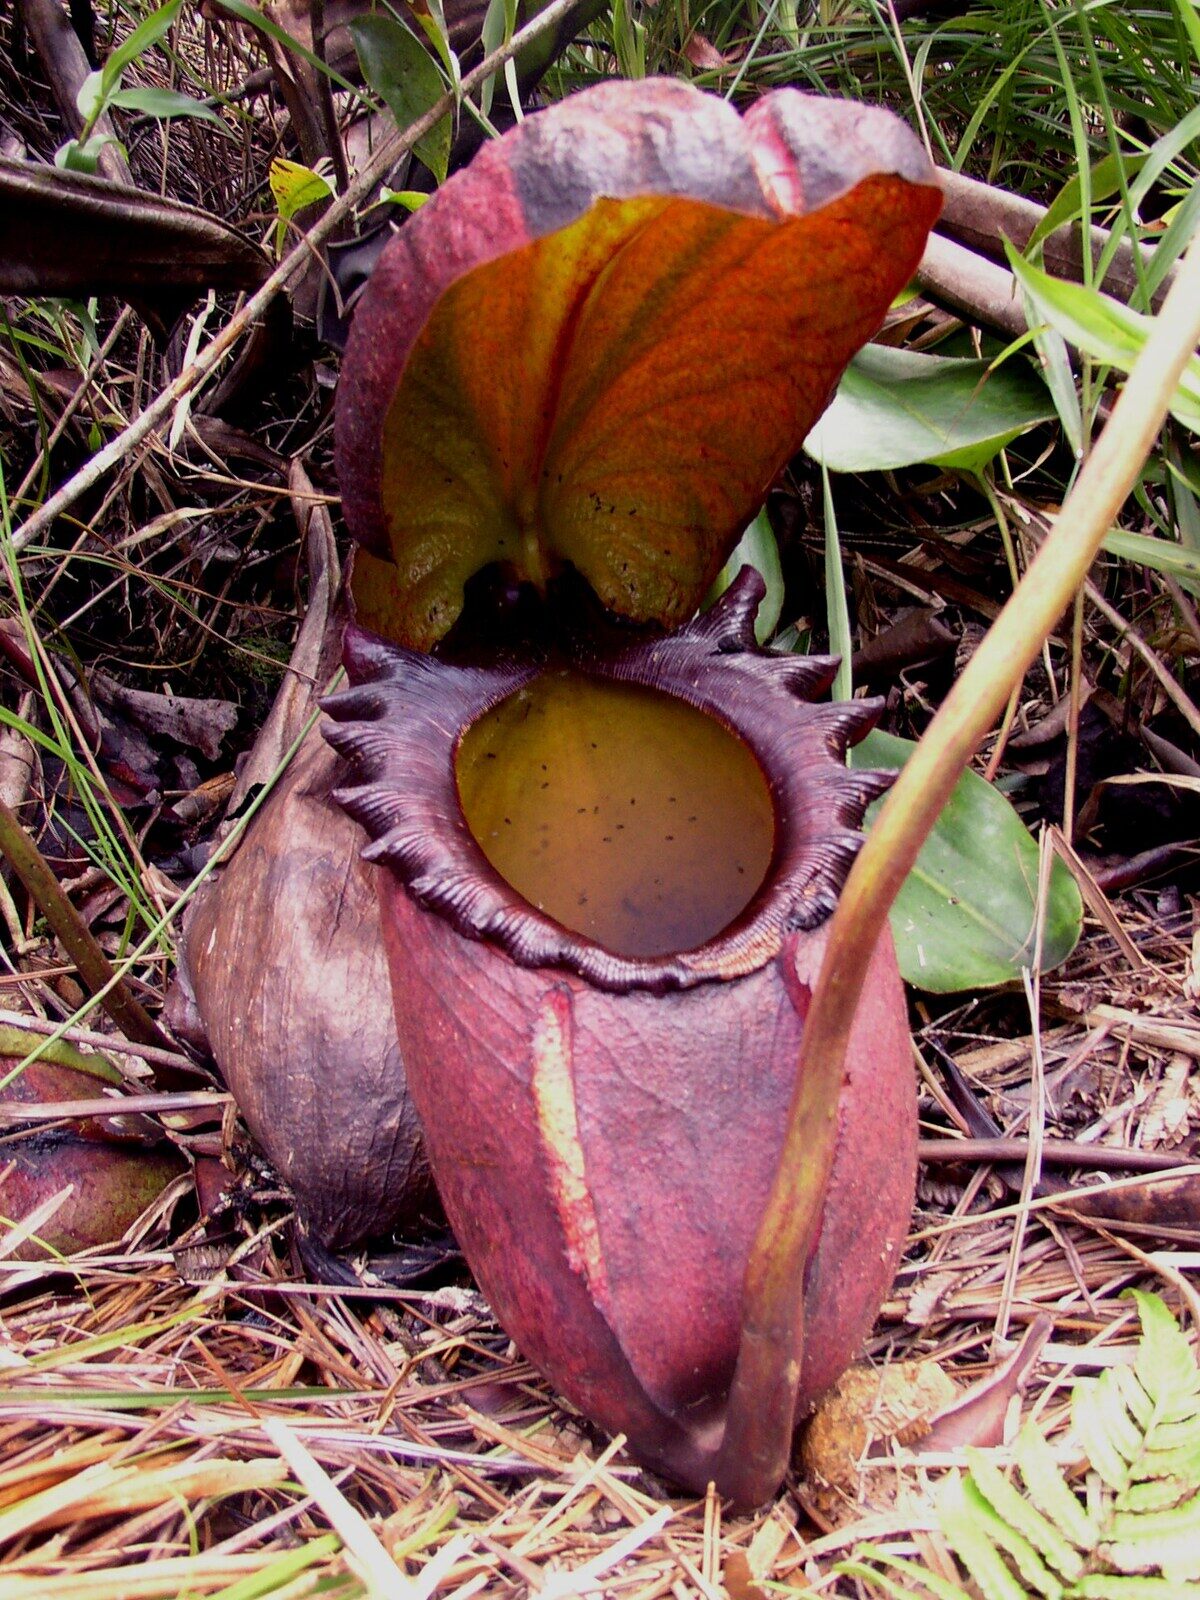 Nepenthes Rajah: The King of the Pitcher Plants – Kota Belud, Malaysia